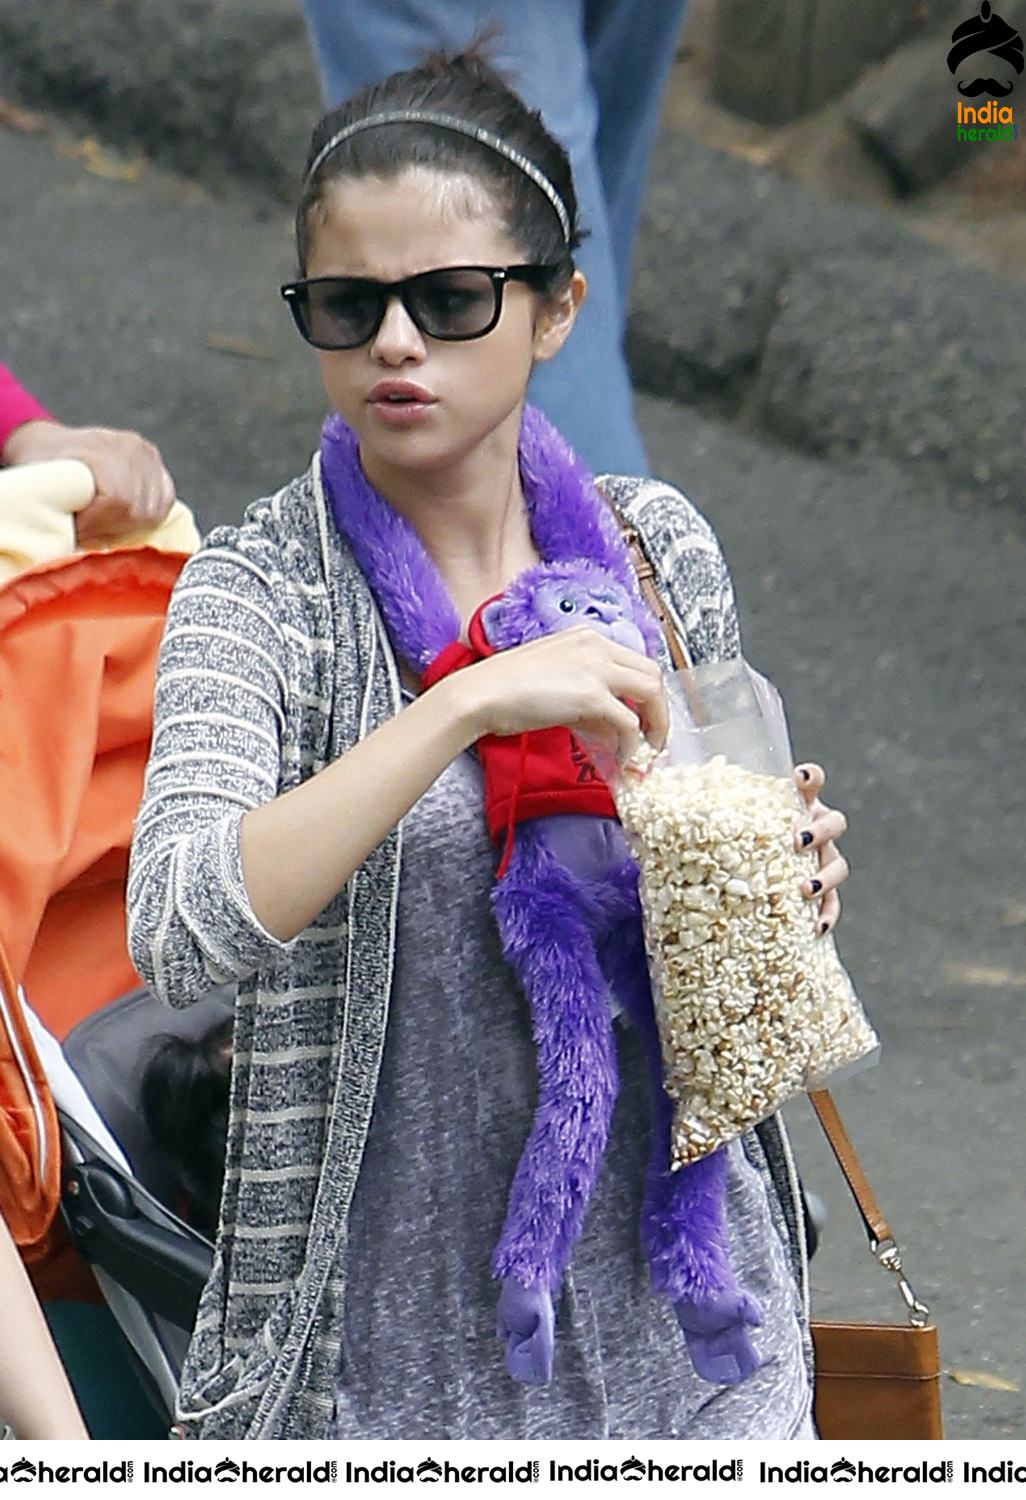 Selena Gomez Visits Los Angeles Zoo with her friends Set 2